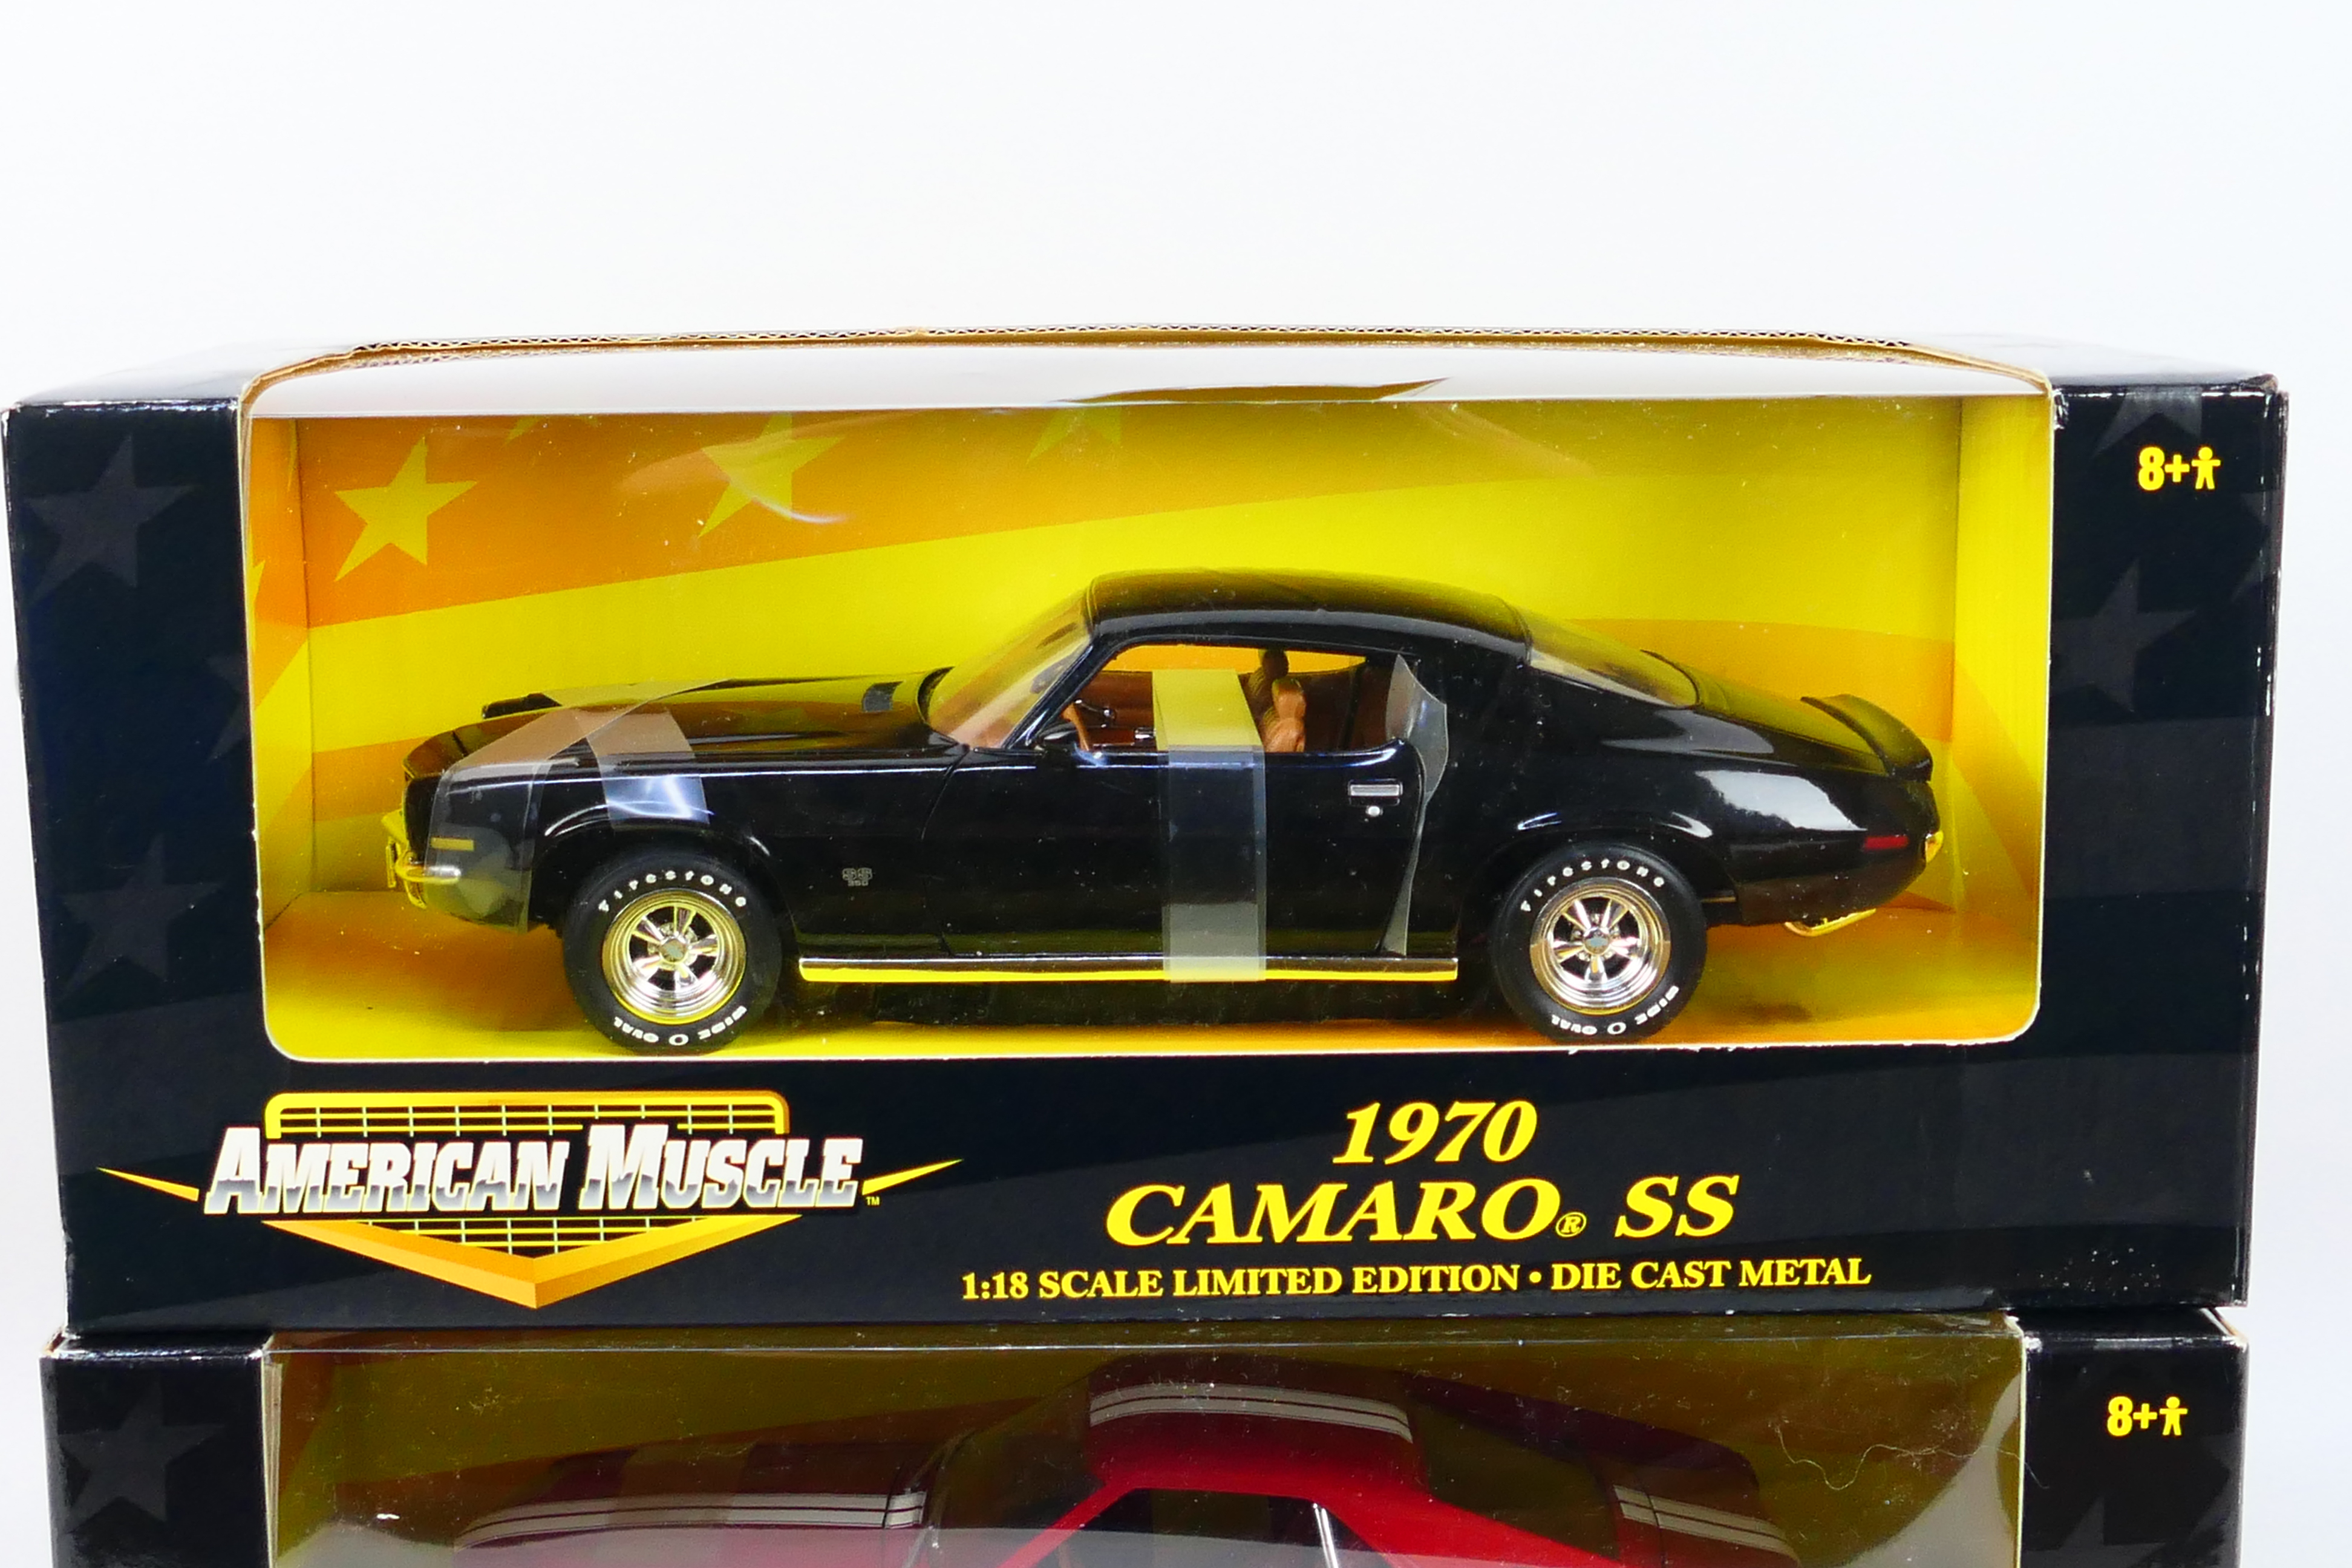 Ertl - Two boxed diecast 'Limited Edition' 1:18 scale model cars from Ertl's 'American Muscle' - Image 2 of 4